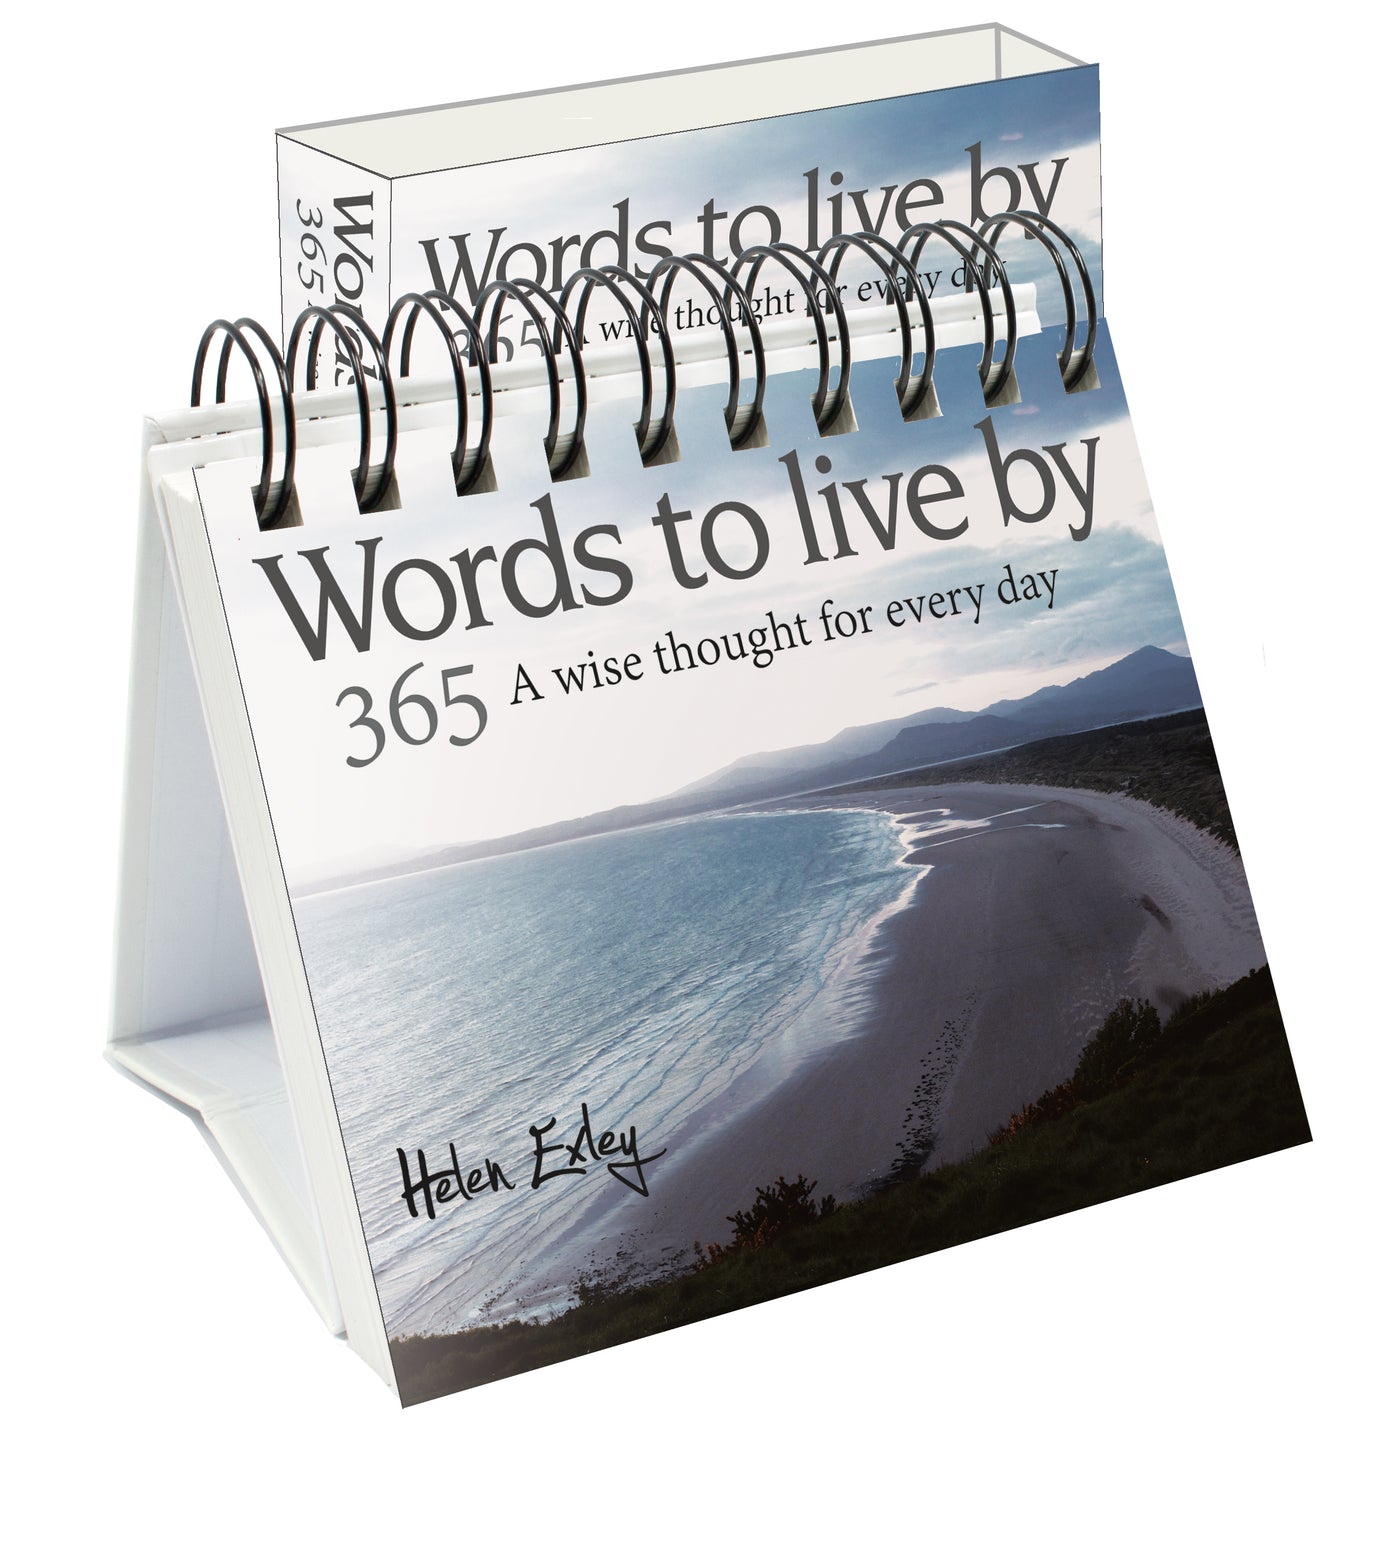 365 Words to live by - A wise thought for every day